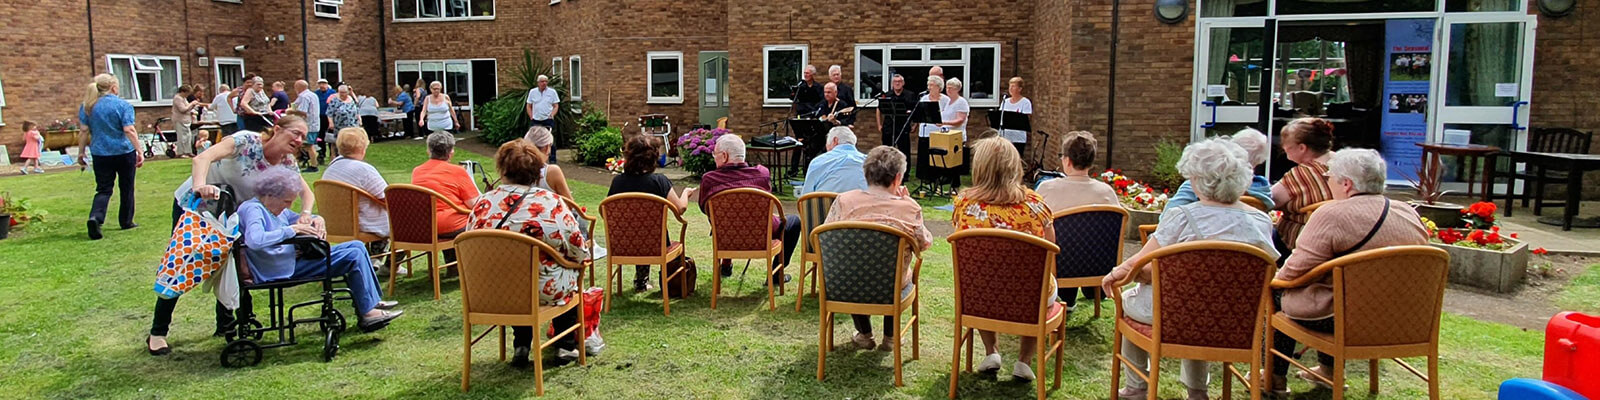 residents listening to a musical performance